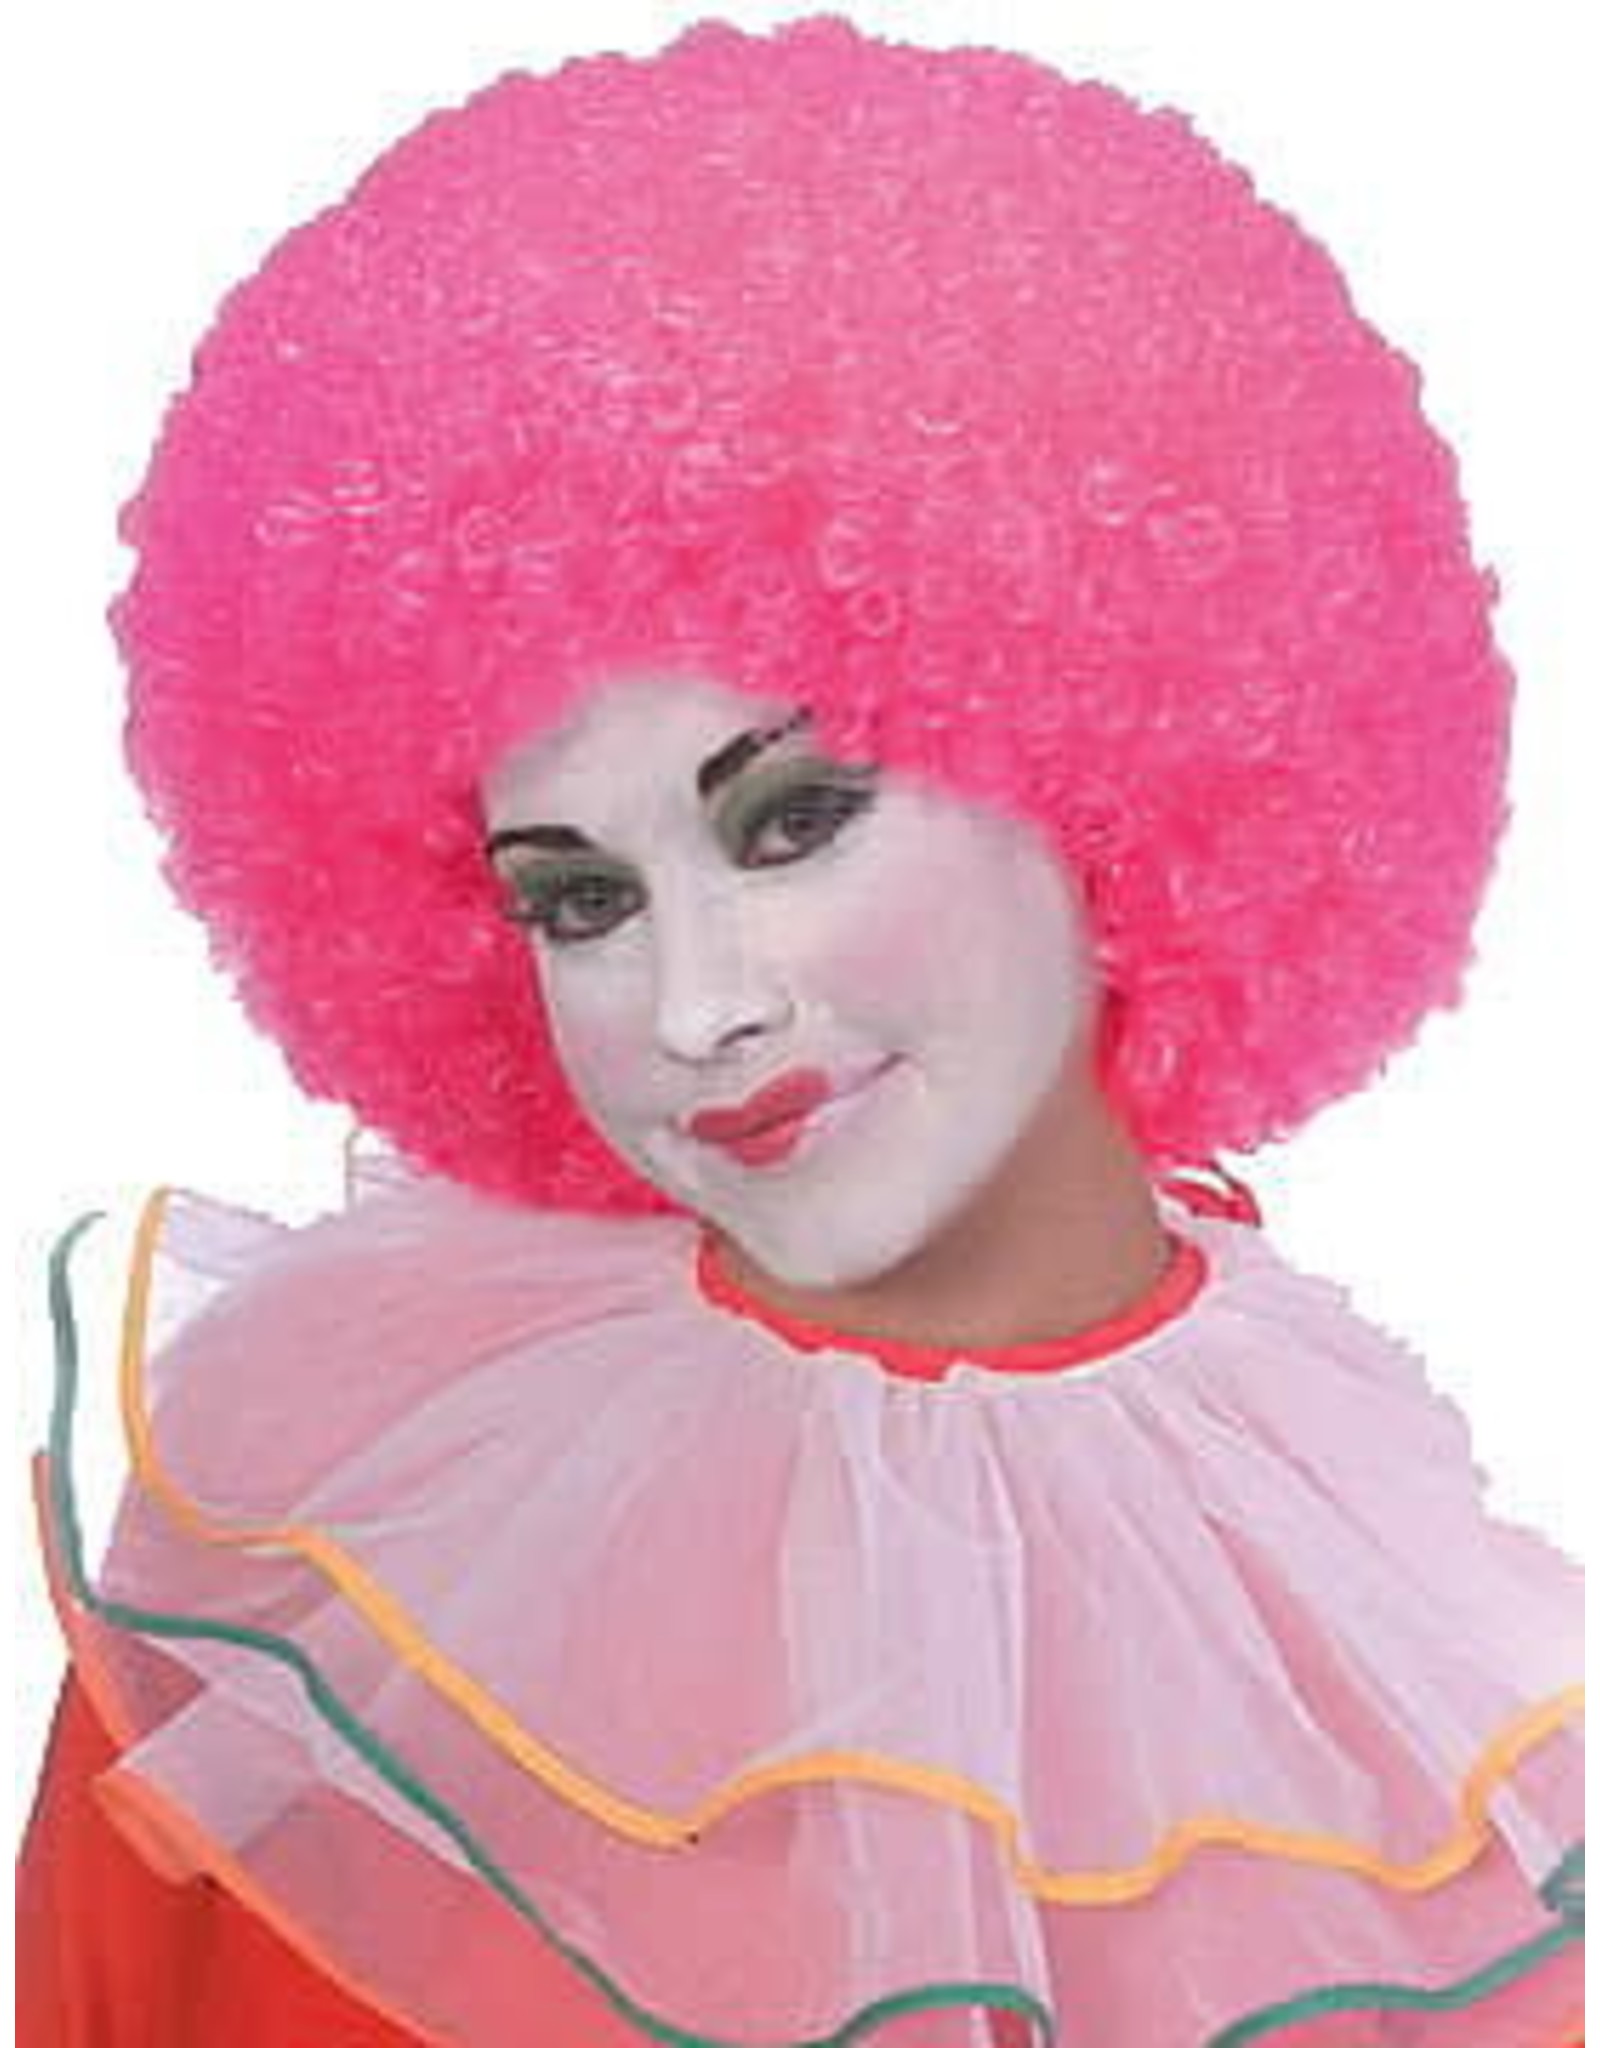 Rubies Costume *Discontinued* Neon Pink Clown Wig